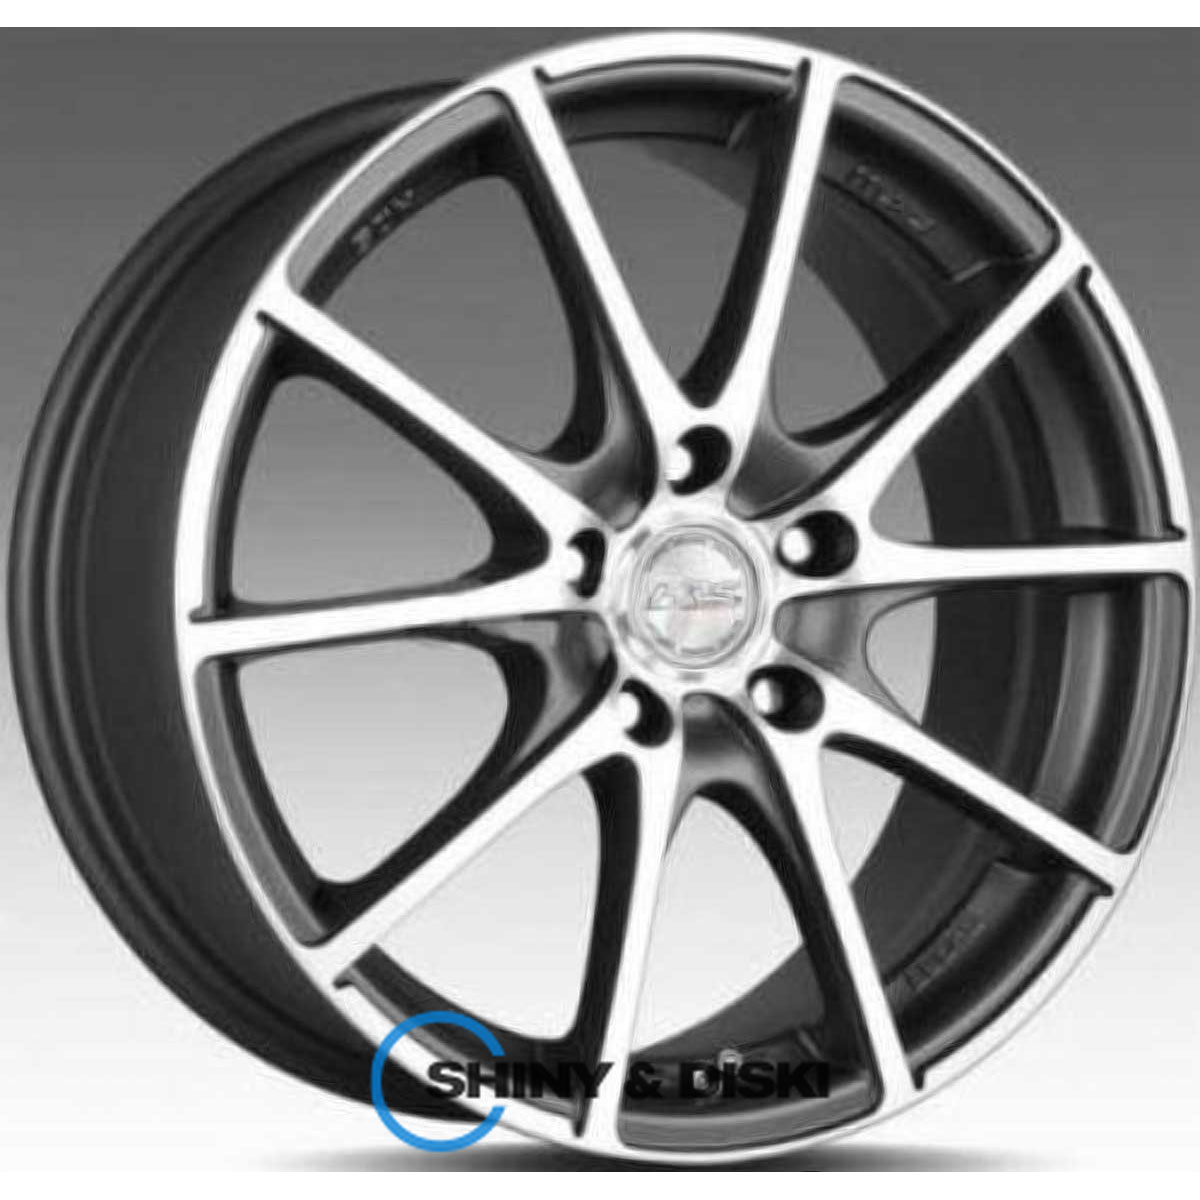 rs tuning h-490 ddnfp r16 w7 pcd5x114.3 et40 dia67.1